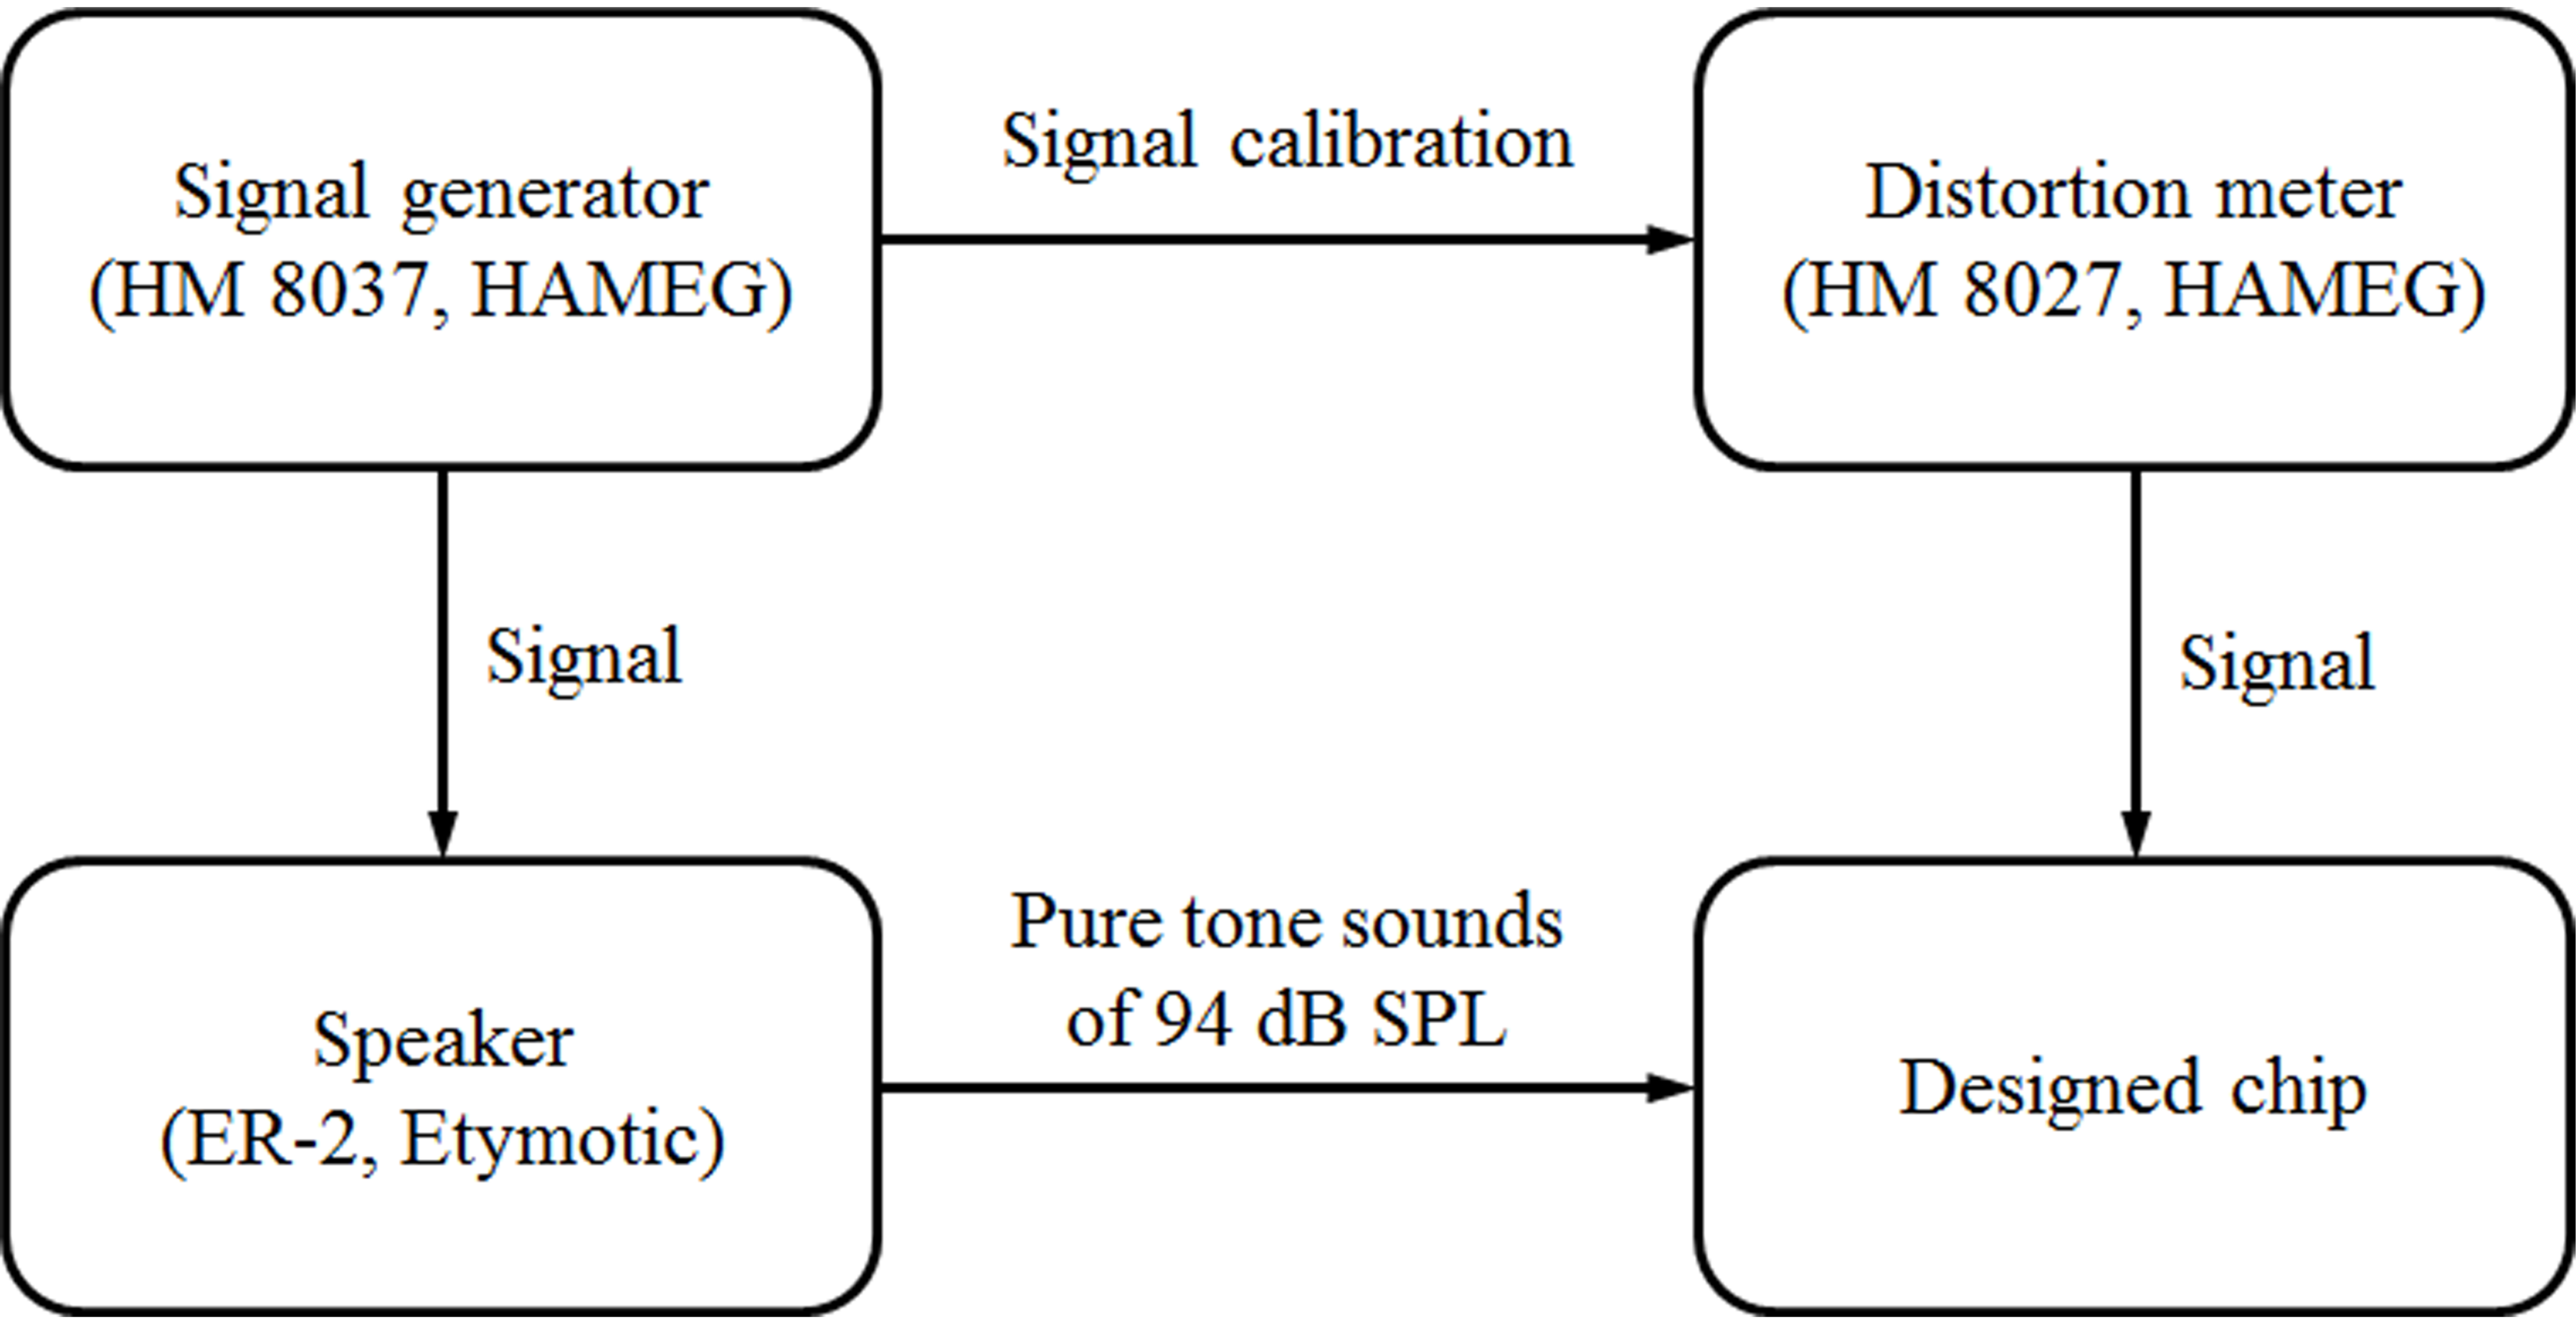 Block diagram of experimental setup for measuring distortion of manufactured SAR ADC.